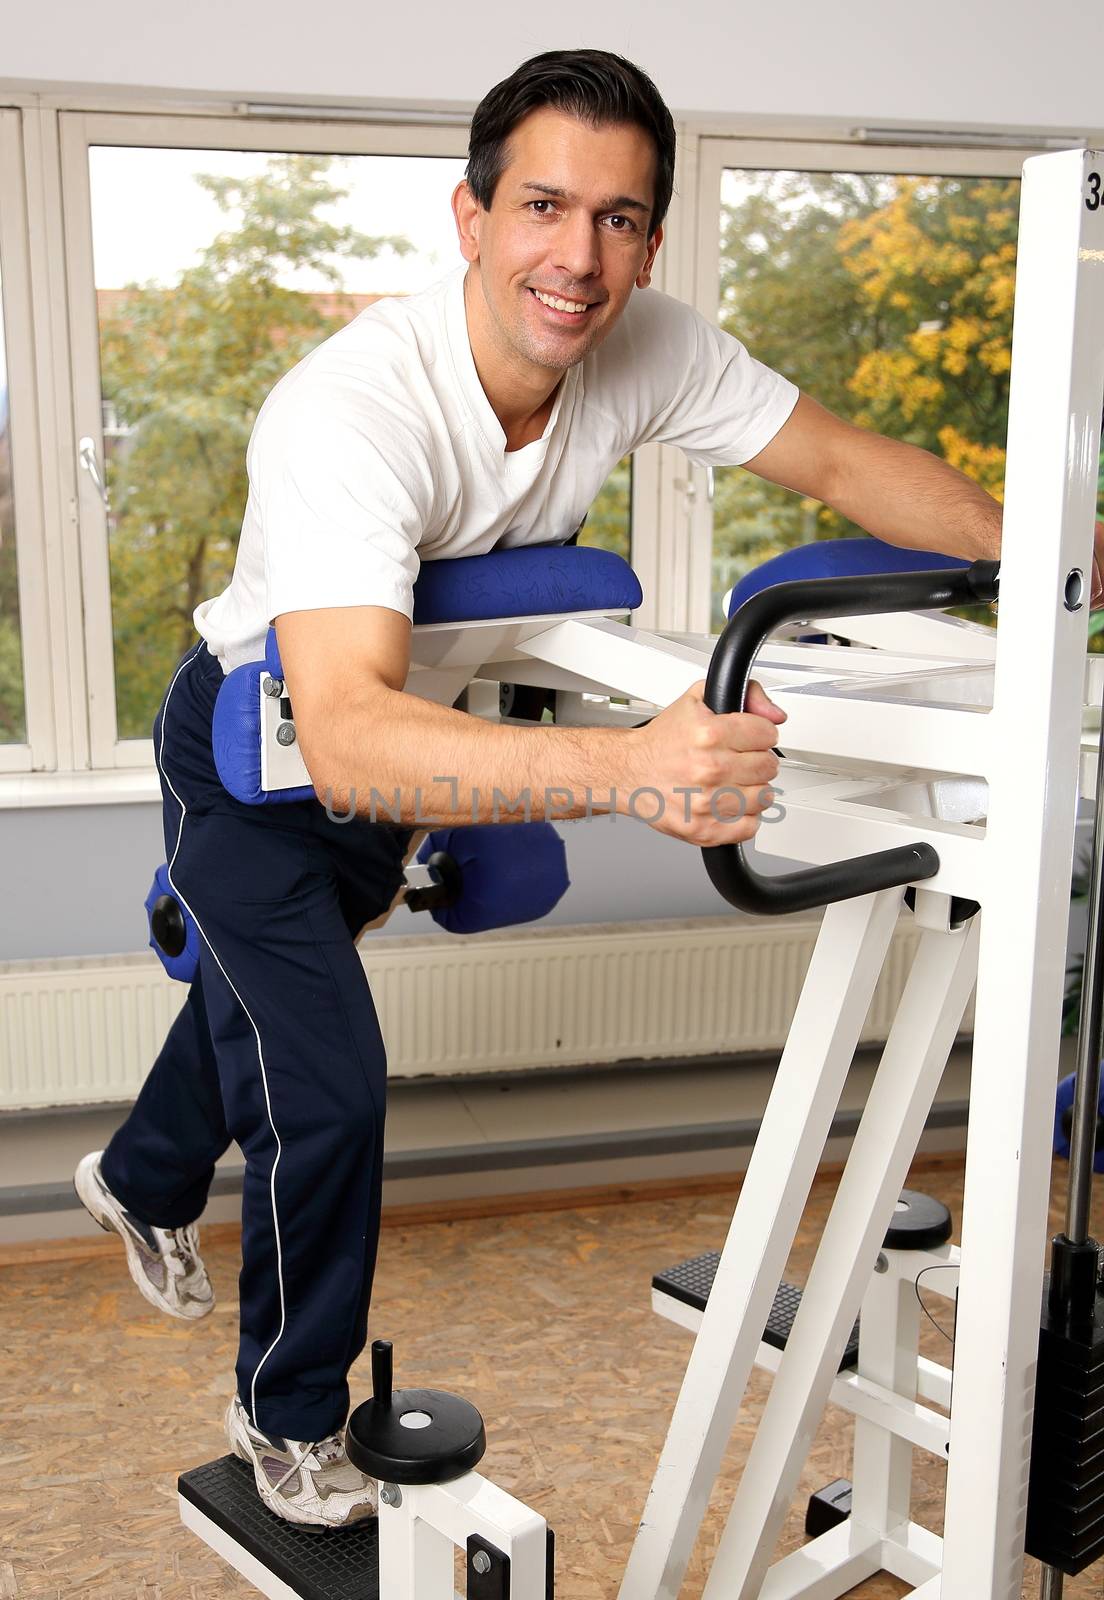 Athletic man exercising and lifting weights in a fitness center